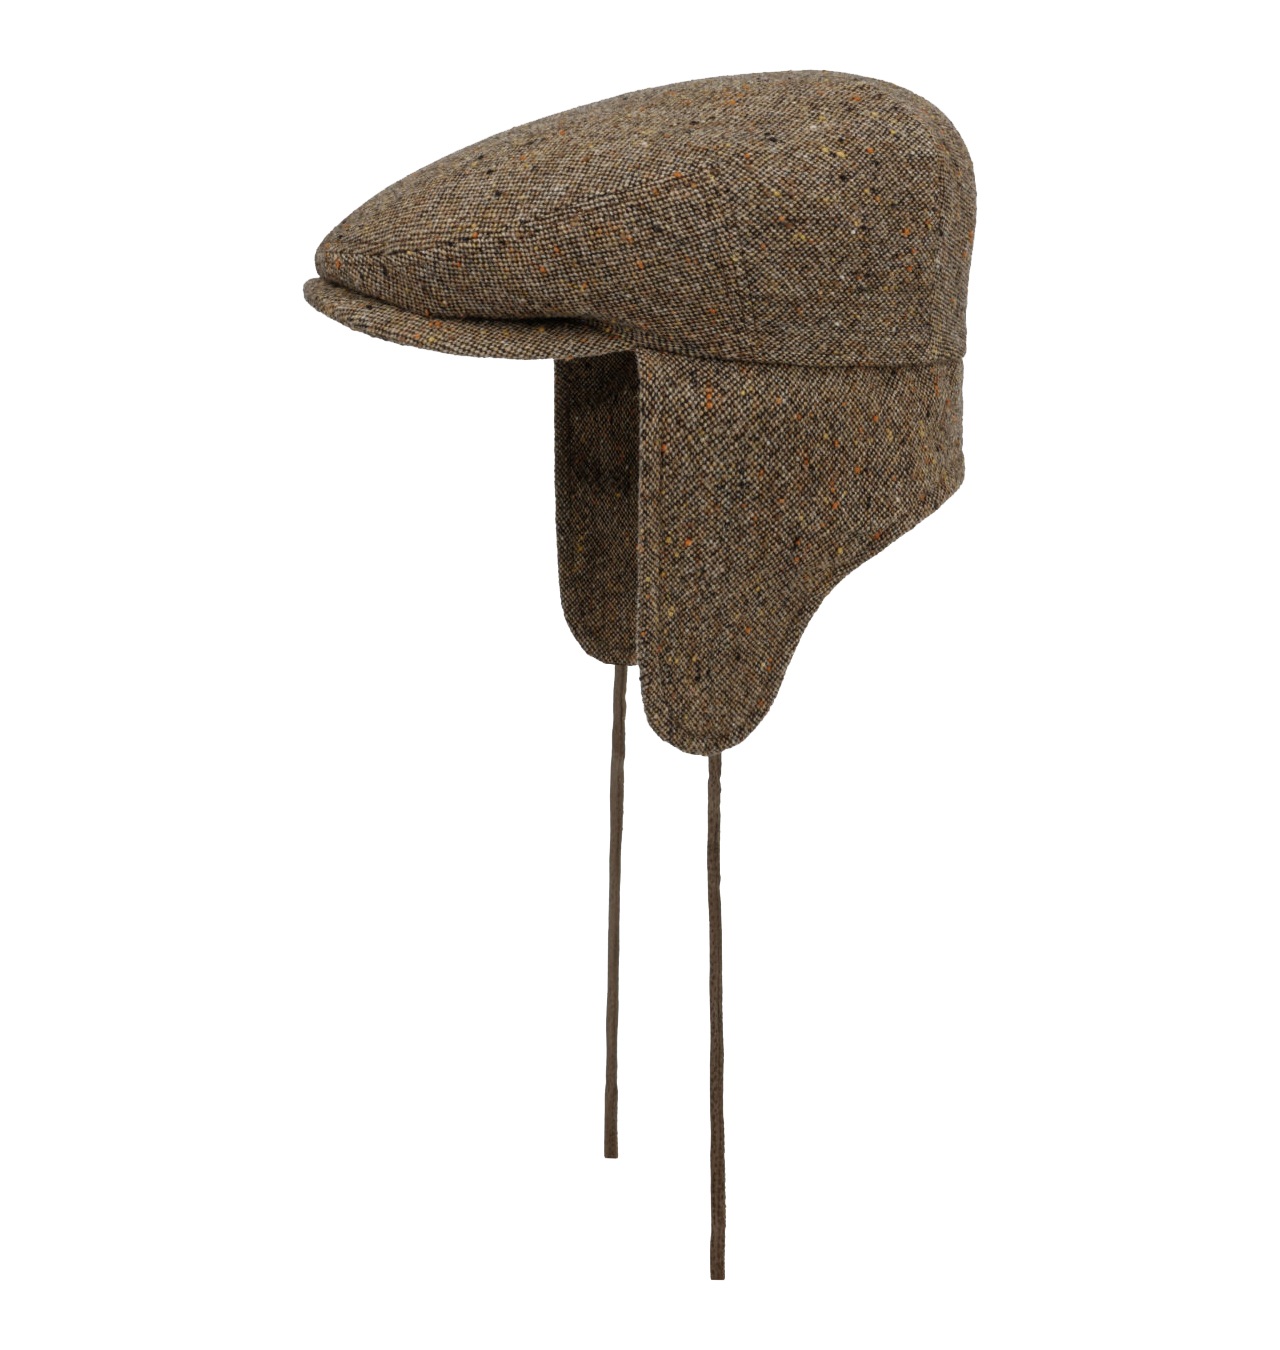 Stetson - Virgin Wool Driver Cap With Ear Flaps - Brown